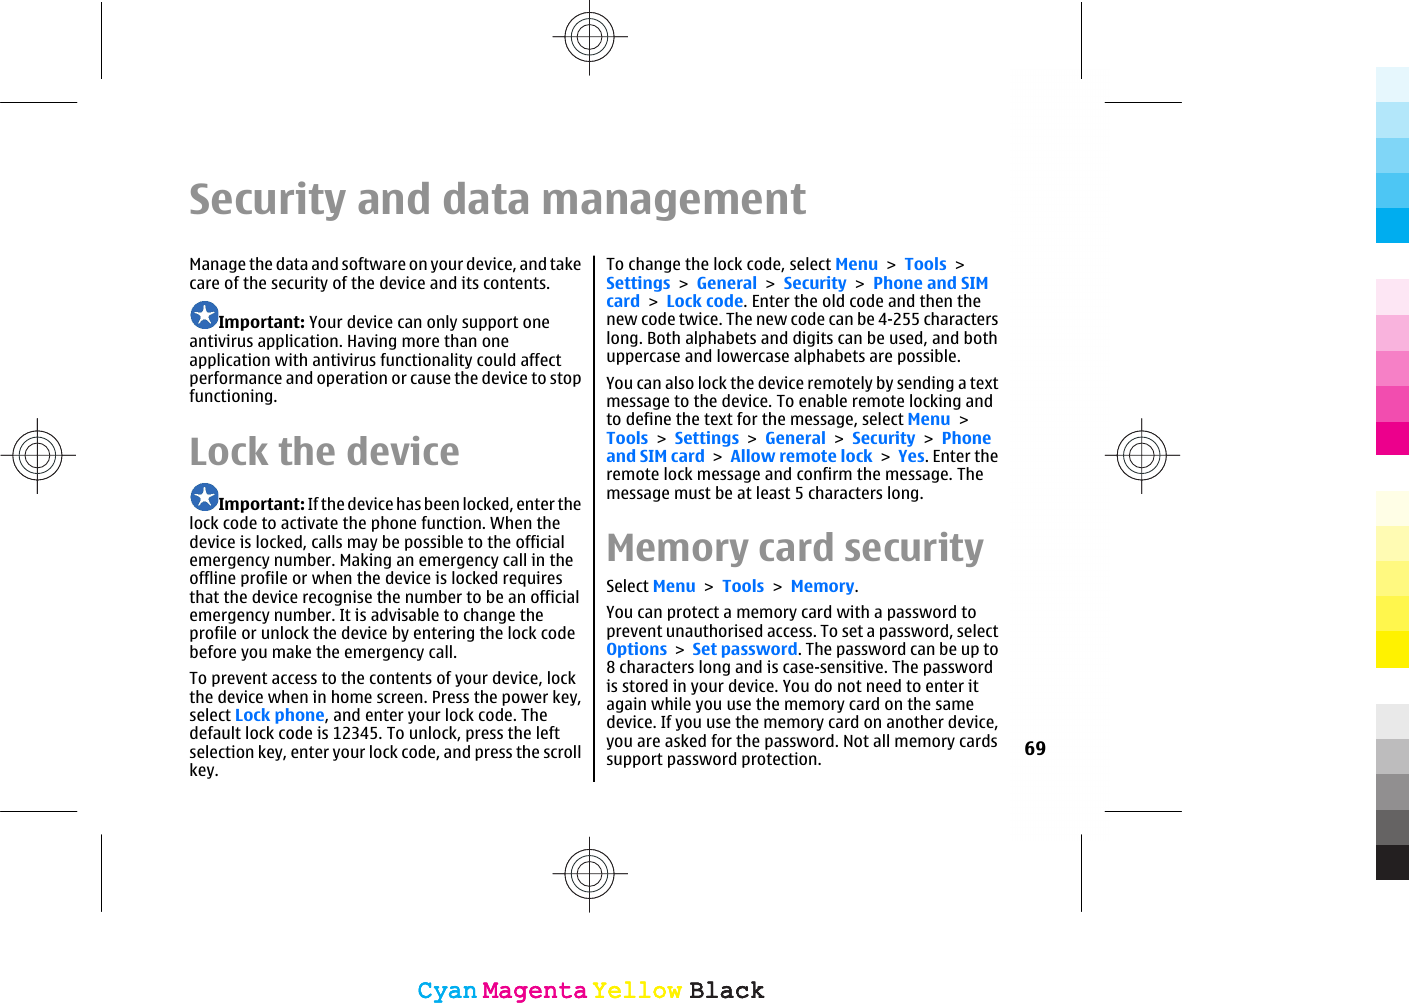 Security and data managementManage the data and software on your device, and takecare of the security of the device and its contents.Important: Your device can only support oneantivirus application. Having more than oneapplication with antivirus functionality could affectperformance and operation or cause the device to stopfunctioning.Lock the deviceImportant: If the device has been locked, enter thelock code to activate the phone function. When thedevice is locked, calls may be possible to the officialemergency number. Making an emergency call in theoffline profile or when the device is locked requiresthat the device recognise the number to be an officialemergency number. It is advisable to change theprofile or unlock the device by entering the lock codebefore you make the emergency call.To prevent access to the contents of your device, lockthe device when in home screen. Press the power key,select Lock phone, and enter your lock code. Thedefault lock code is 12345. To unlock, press the leftselection key, enter your lock code, and press the scrollkey.To change the lock code, select Menu &gt; Tools &gt;Settings &gt; General &gt; Security &gt; Phone and SIMcard &gt; Lock code. Enter the old code and then thenew code twice. The new code can be 4-255 characterslong. Both alphabets and digits can be used, and bothuppercase and lowercase alphabets are possible.You can also lock the device remotely by sending a textmessage to the device. To enable remote locking andto define the text for the message, select Menu &gt;Tools &gt; Settings &gt; General &gt; Security &gt; Phoneand SIM card &gt; Allow remote lock &gt; Yes. Enter theremote lock message and confirm the message. Themessage must be at least 5 characters long.Memory card securitySelect Menu &gt; Tools &gt; Memory.You can protect a memory card with a password toprevent unauthorised access. To set a password, selectOptions &gt; Set password. The password can be up to8 characters long and is case-sensitive. The passwordis stored in your device. You do not need to enter itagain while you use the memory card on the samedevice. If you use the memory card on another device,you are asked for the password. Not all memory cardssupport password protection. 69CyanCyanMagentaMagentaYellowYellowBlackBlackCyanCyanMagentaMagentaYellowYellowBlackBlack